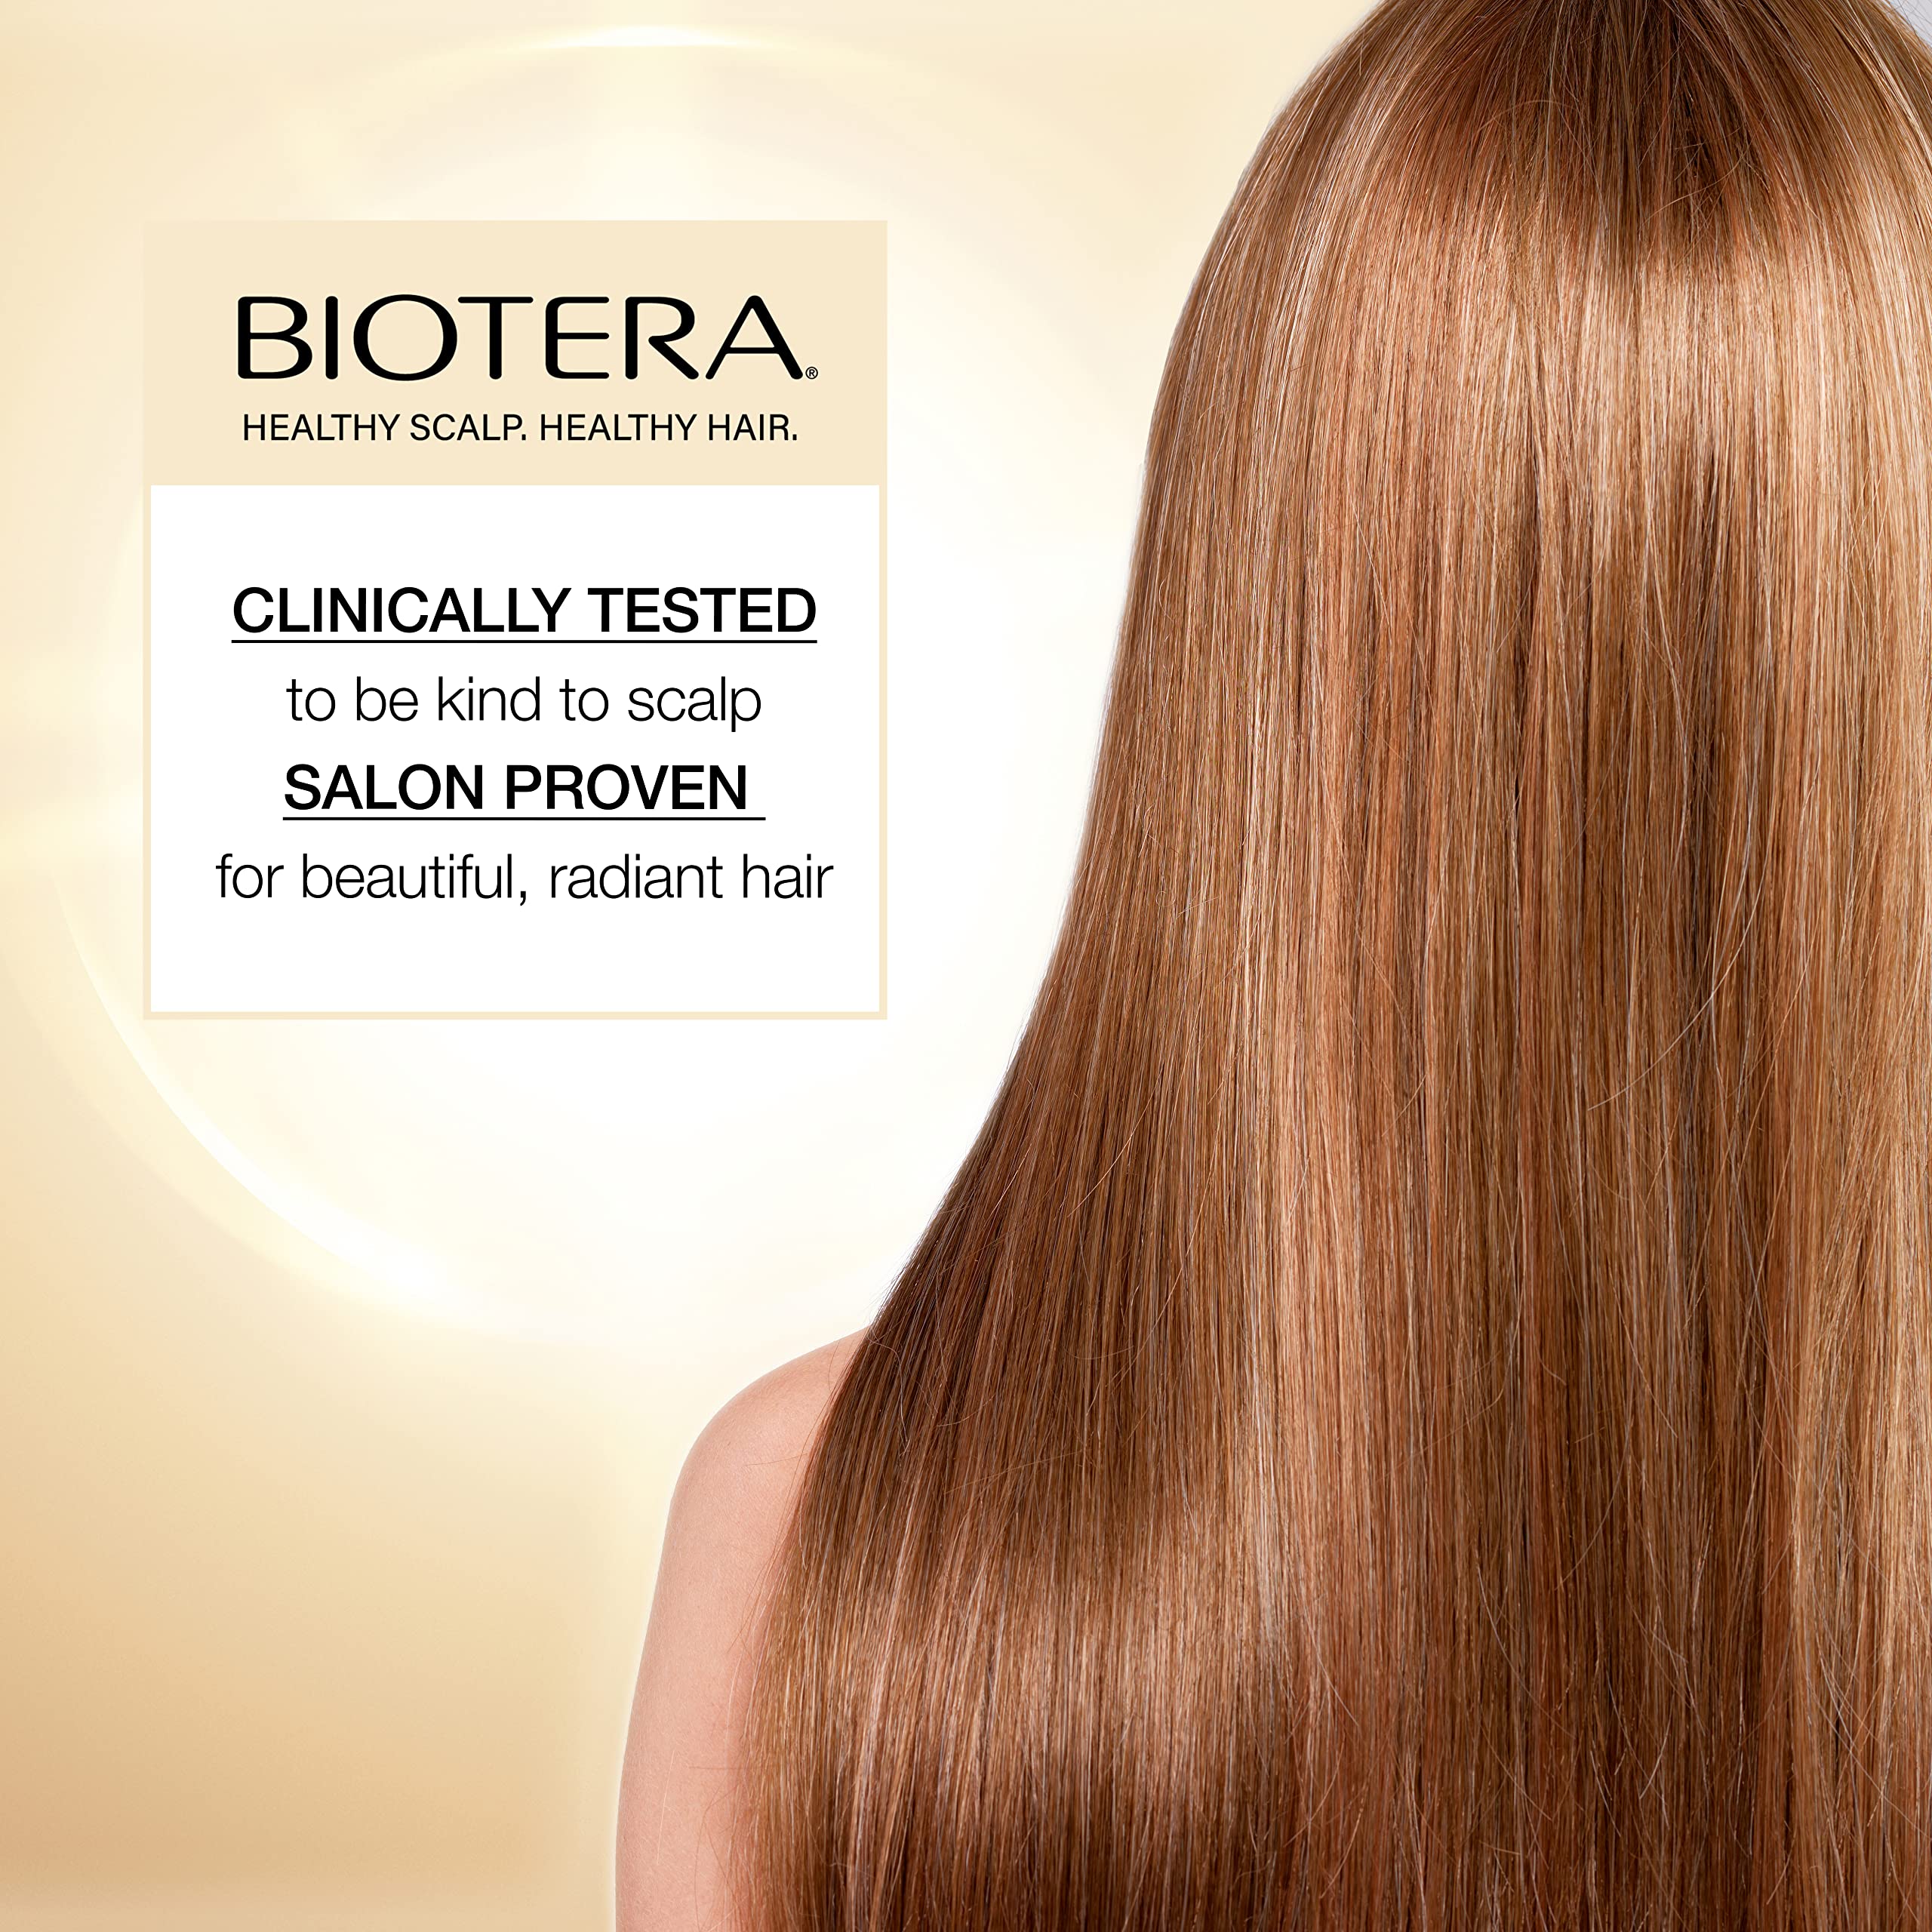 BIOTERA Ultra Thick & Full Sheer Volume Shampoo and Conditioner | Fine or Limp Hair | Microbiome Friendly | Vegan & Cruelty Free | Paraben Free | Color-Safe